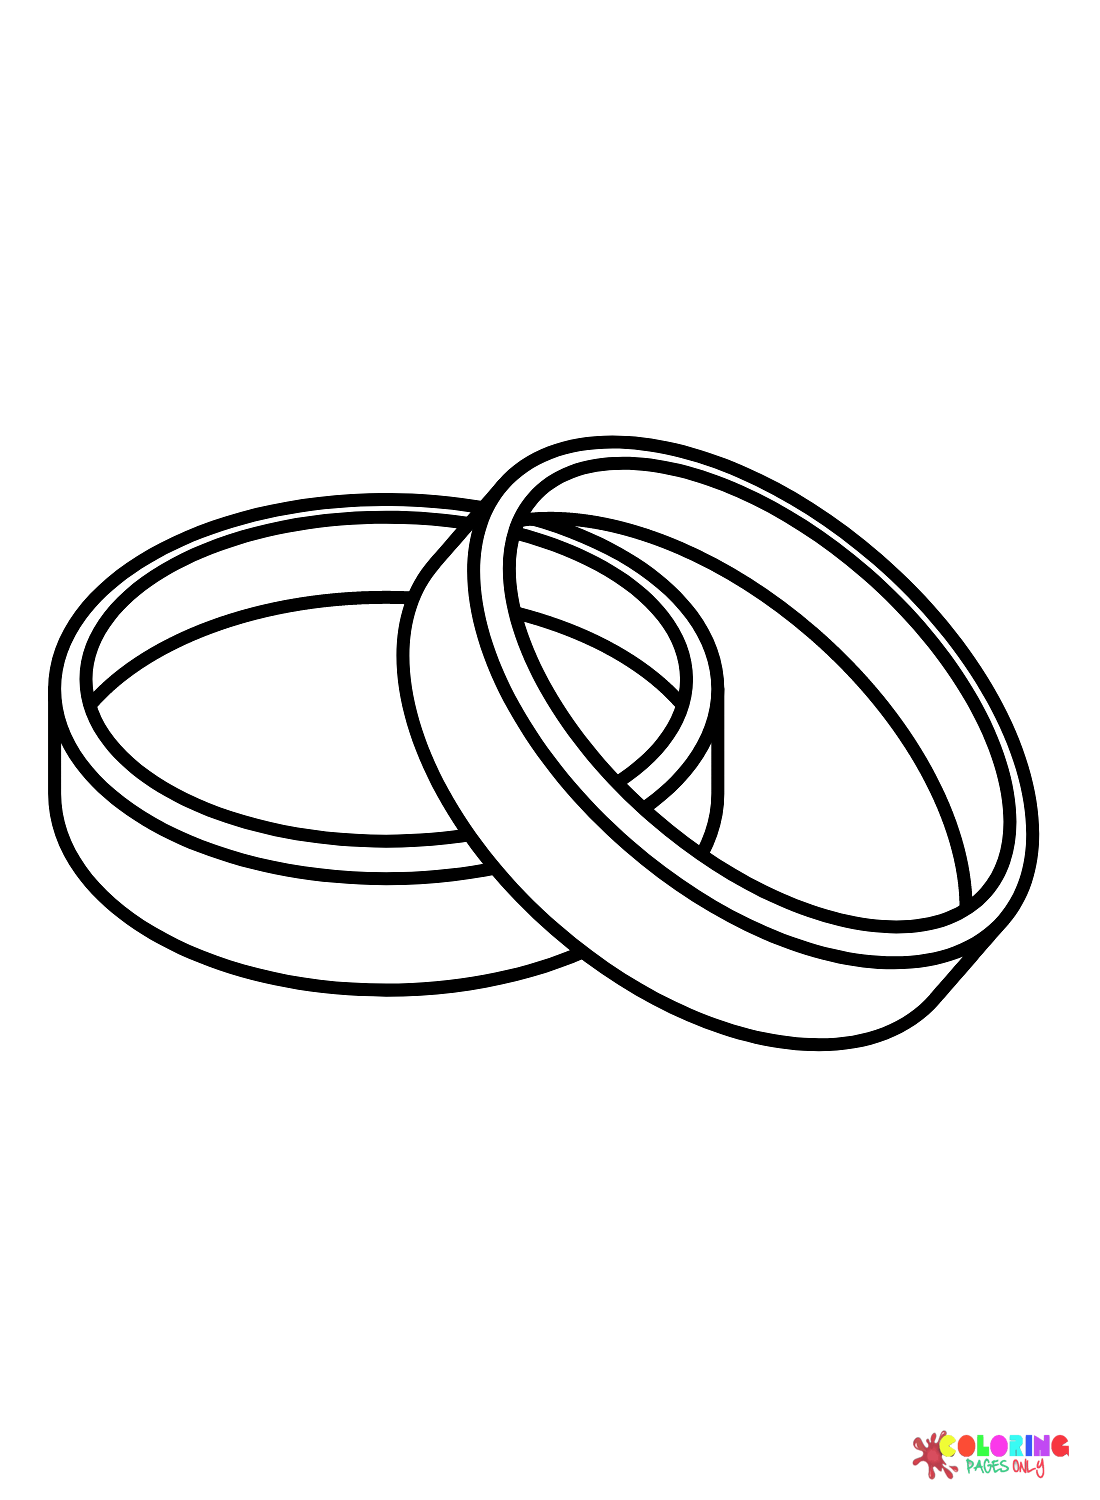 Wedding Ring Simple Coloring Page